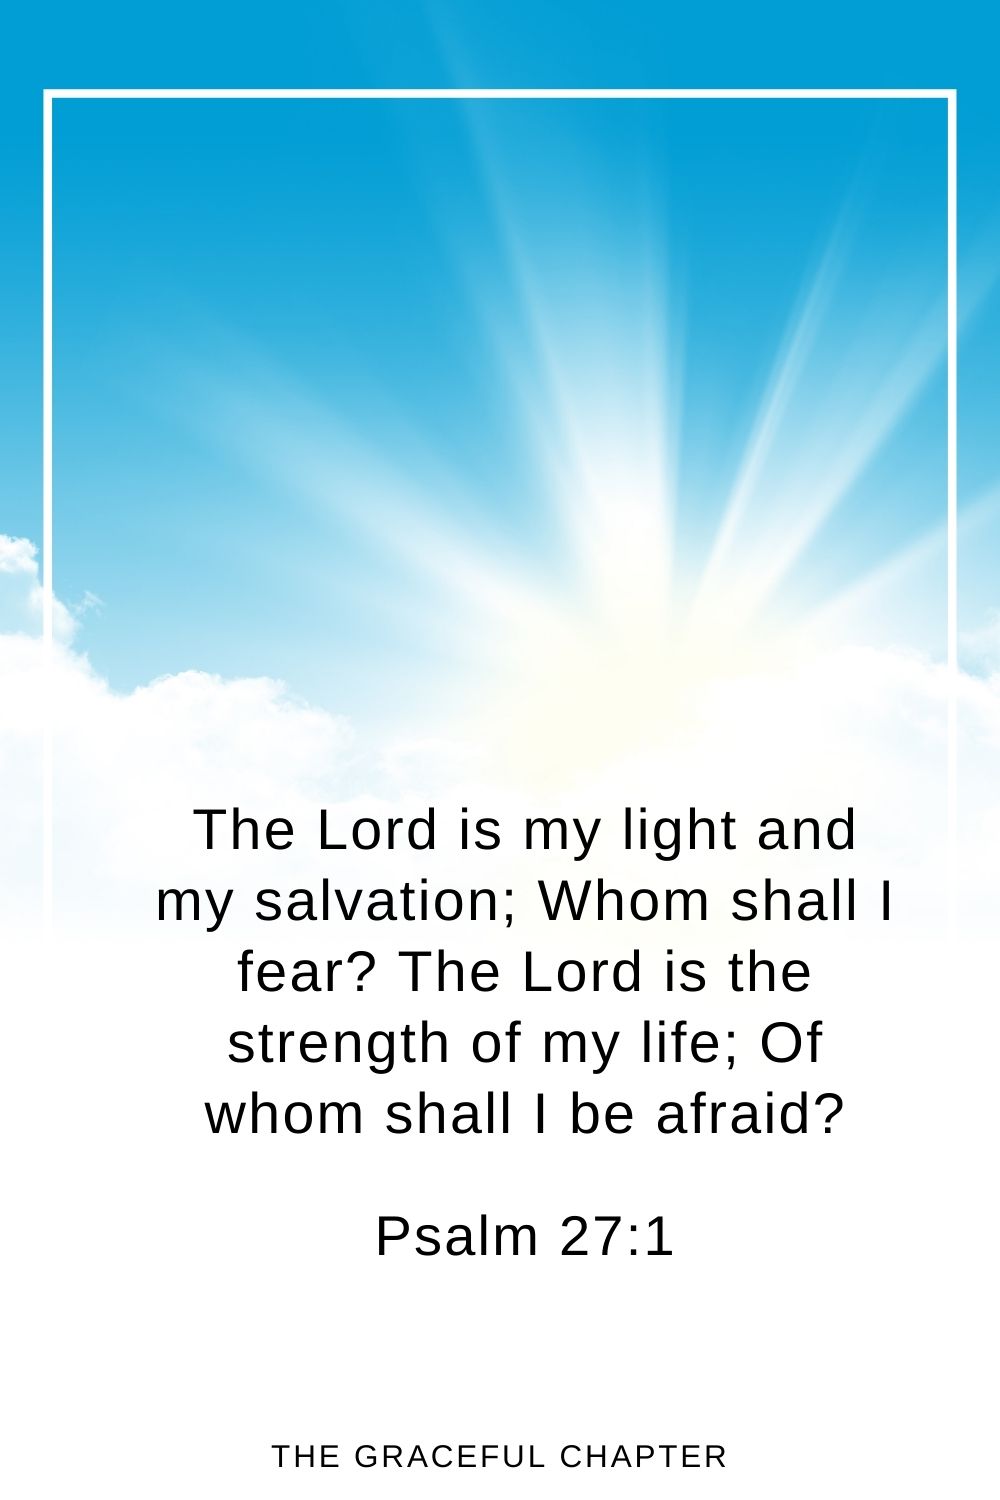 The Lord is my light and my salvation; Whom shall I fear? The Lord is the strength of my life; Of whom shall I be afraid? Psalm 27:1